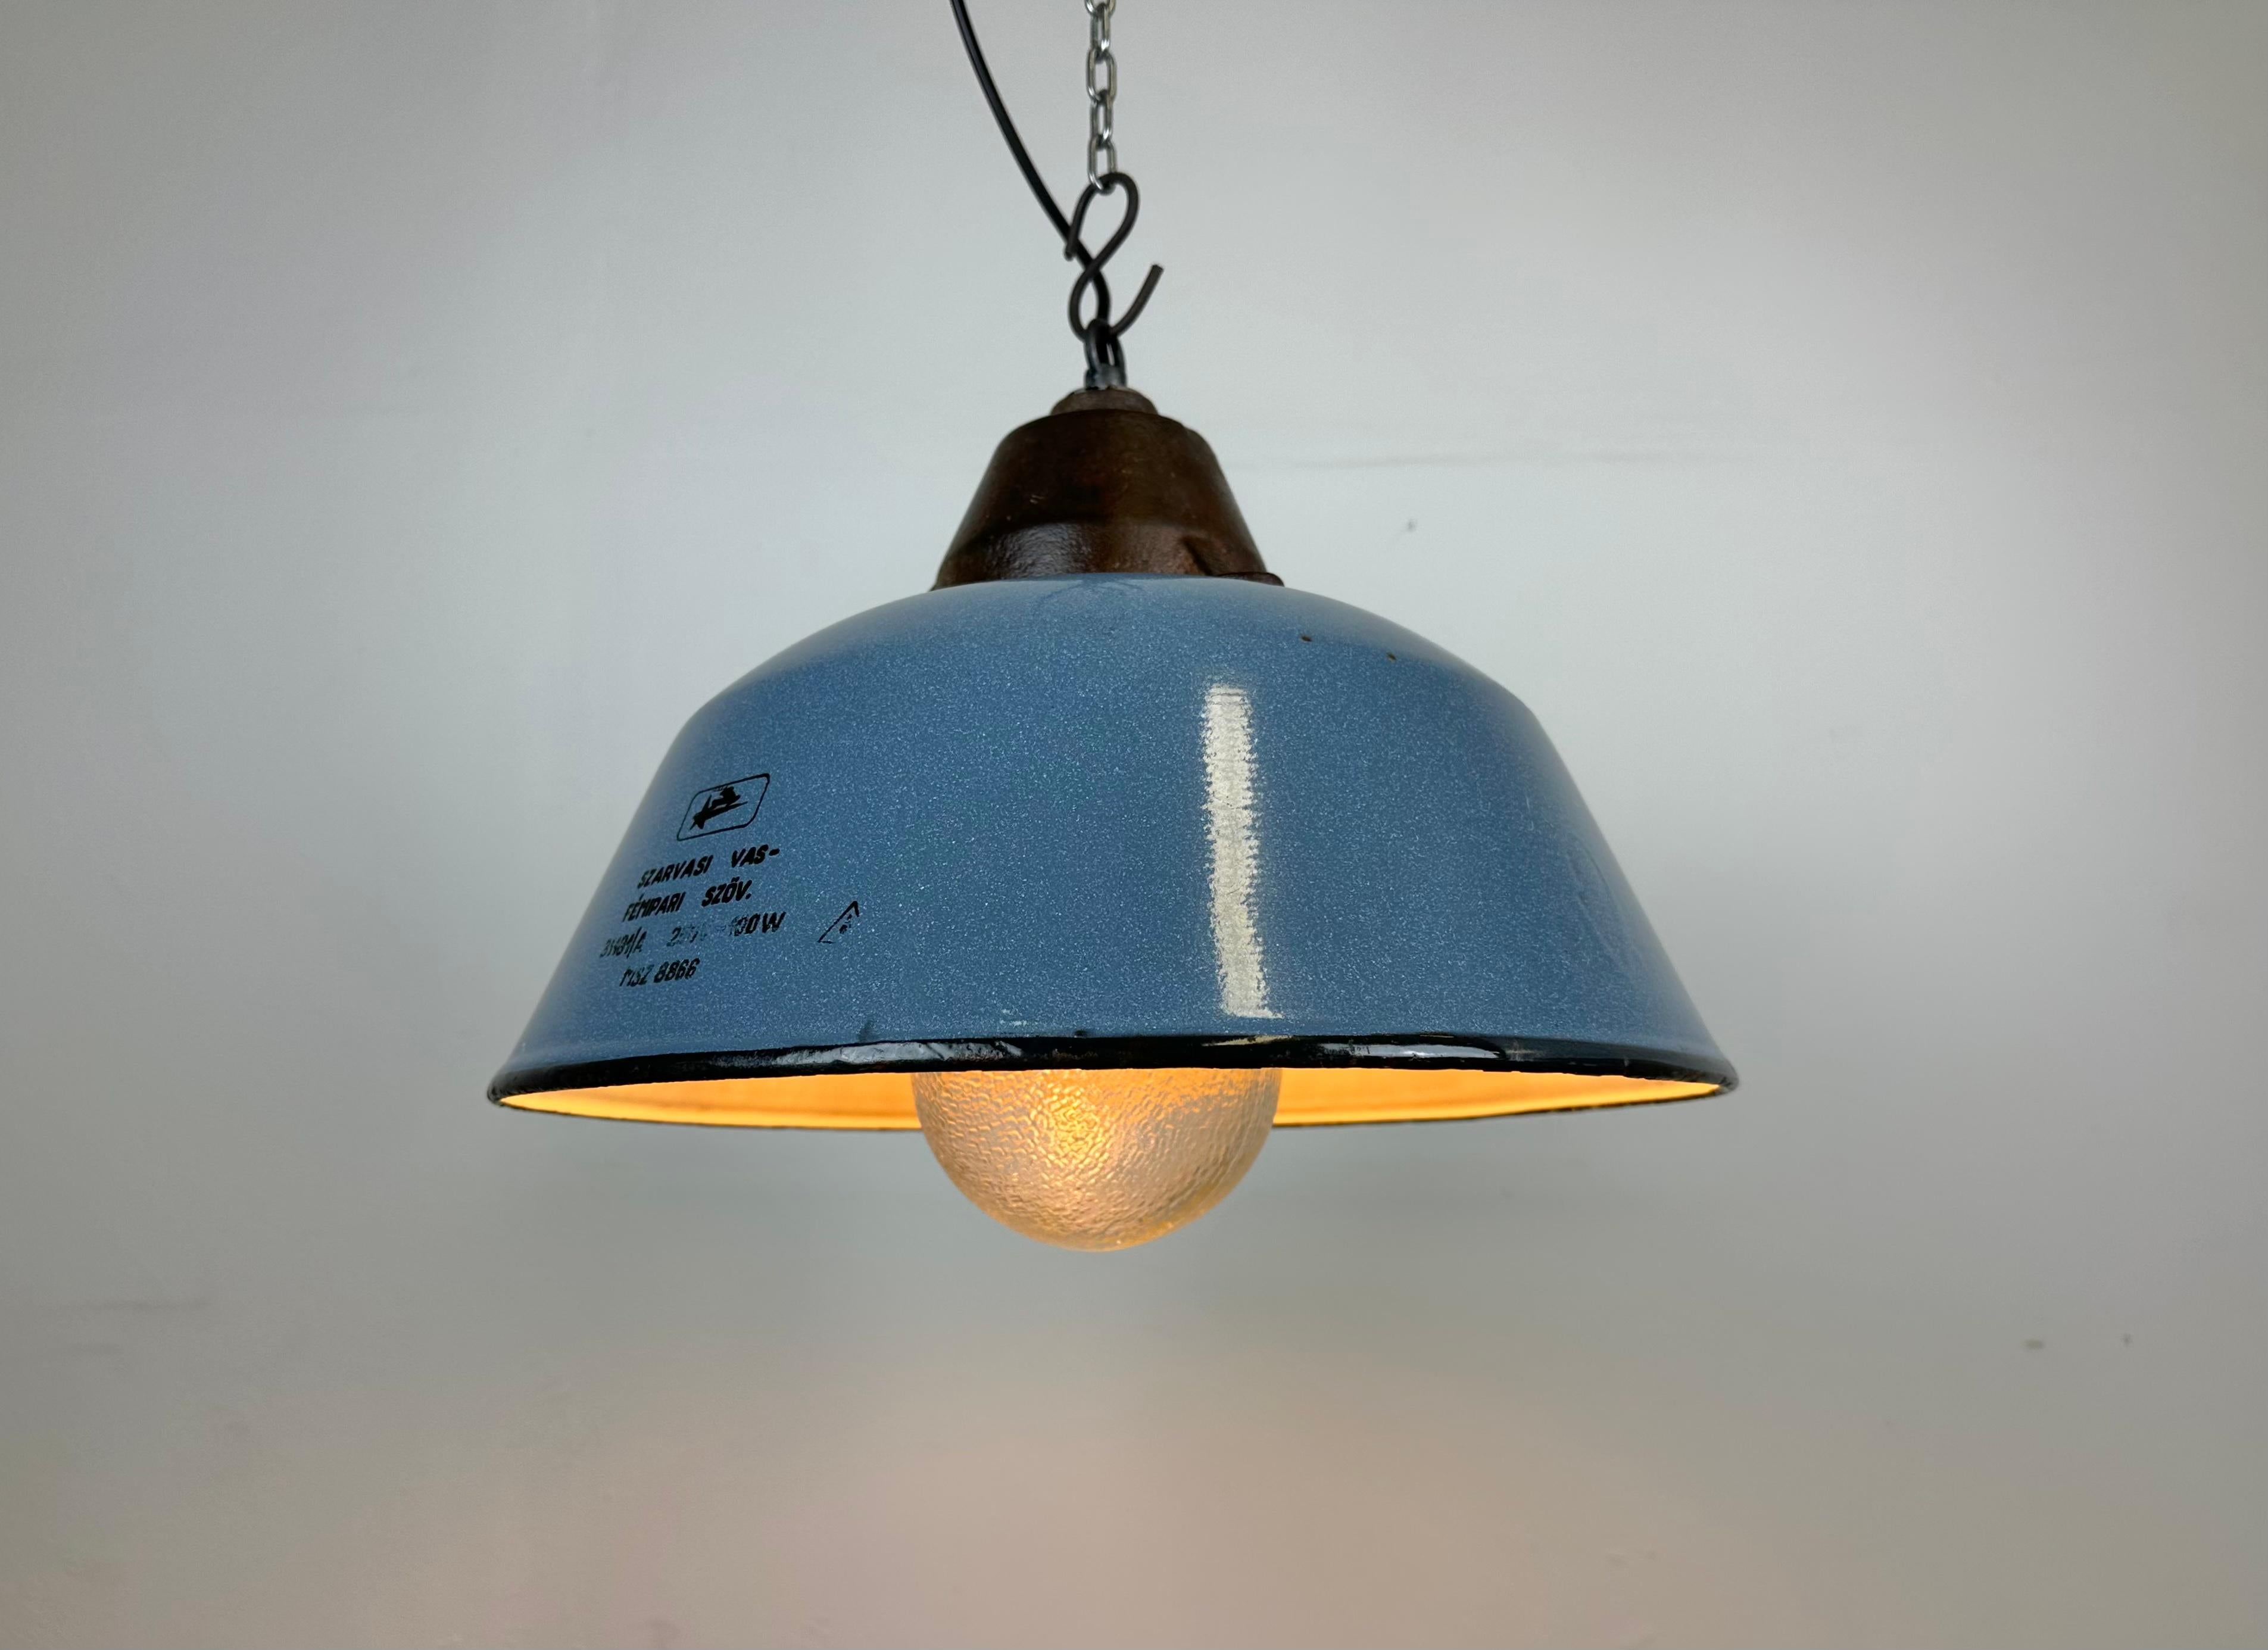 Industrial Grey Enamel and Cast Iron Pendant Light with Glass Cover, 1960s For Sale 4